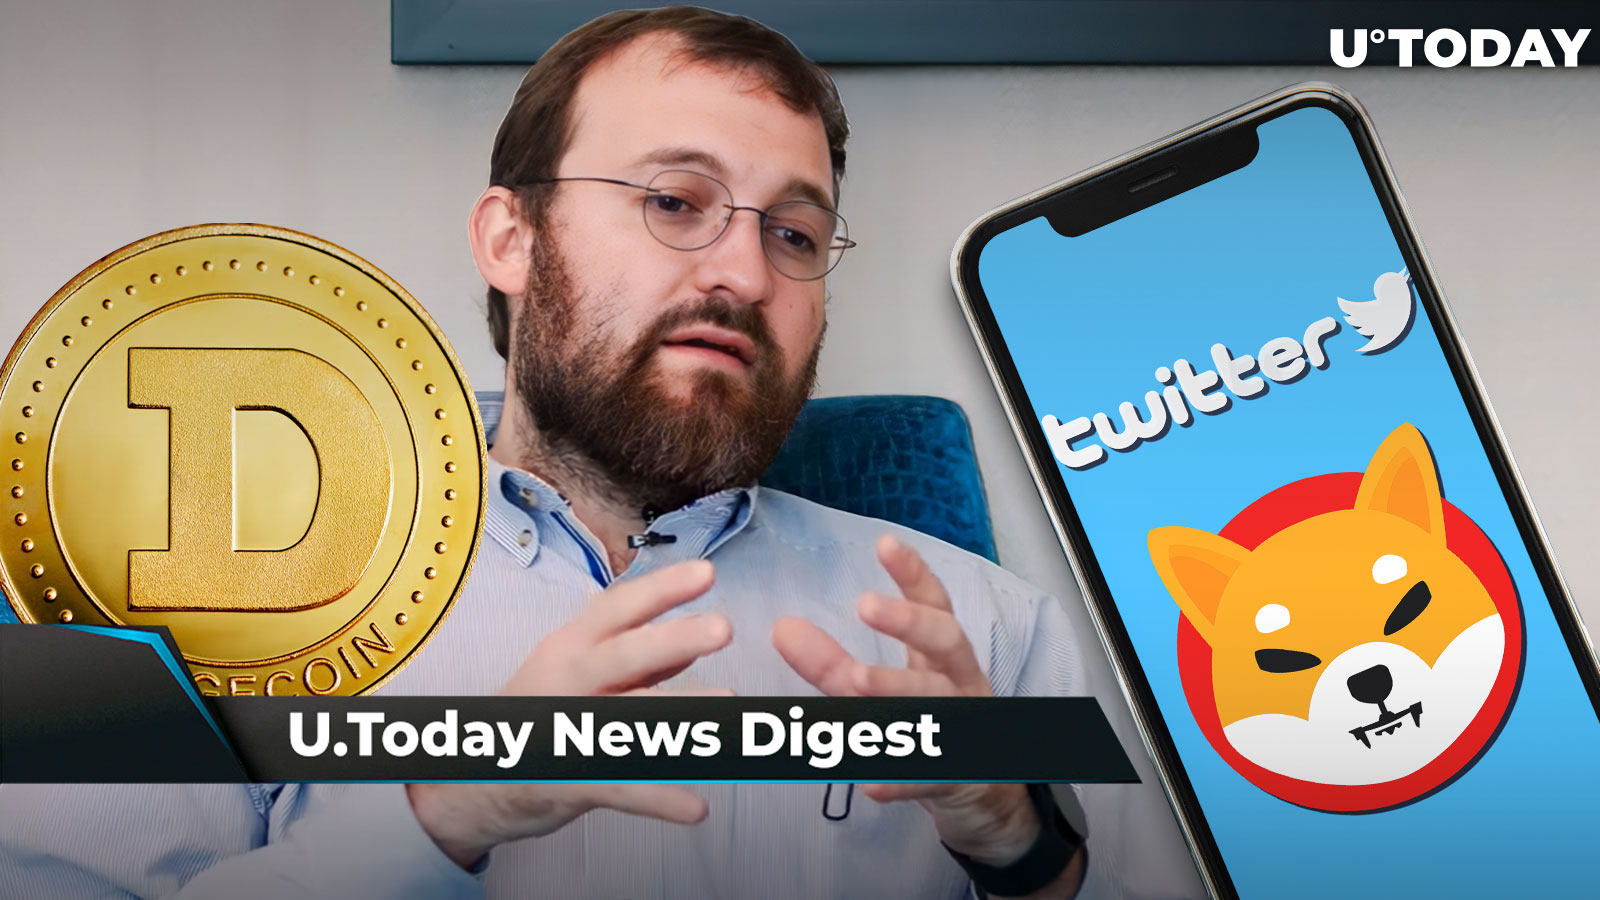 SHIB Tweets Mysterious Teaser, Ripple Is Ready for Important Upgrade, Cardano Founder Says DOGE Finally Has Use Case: Crypto News Digest by U.Today